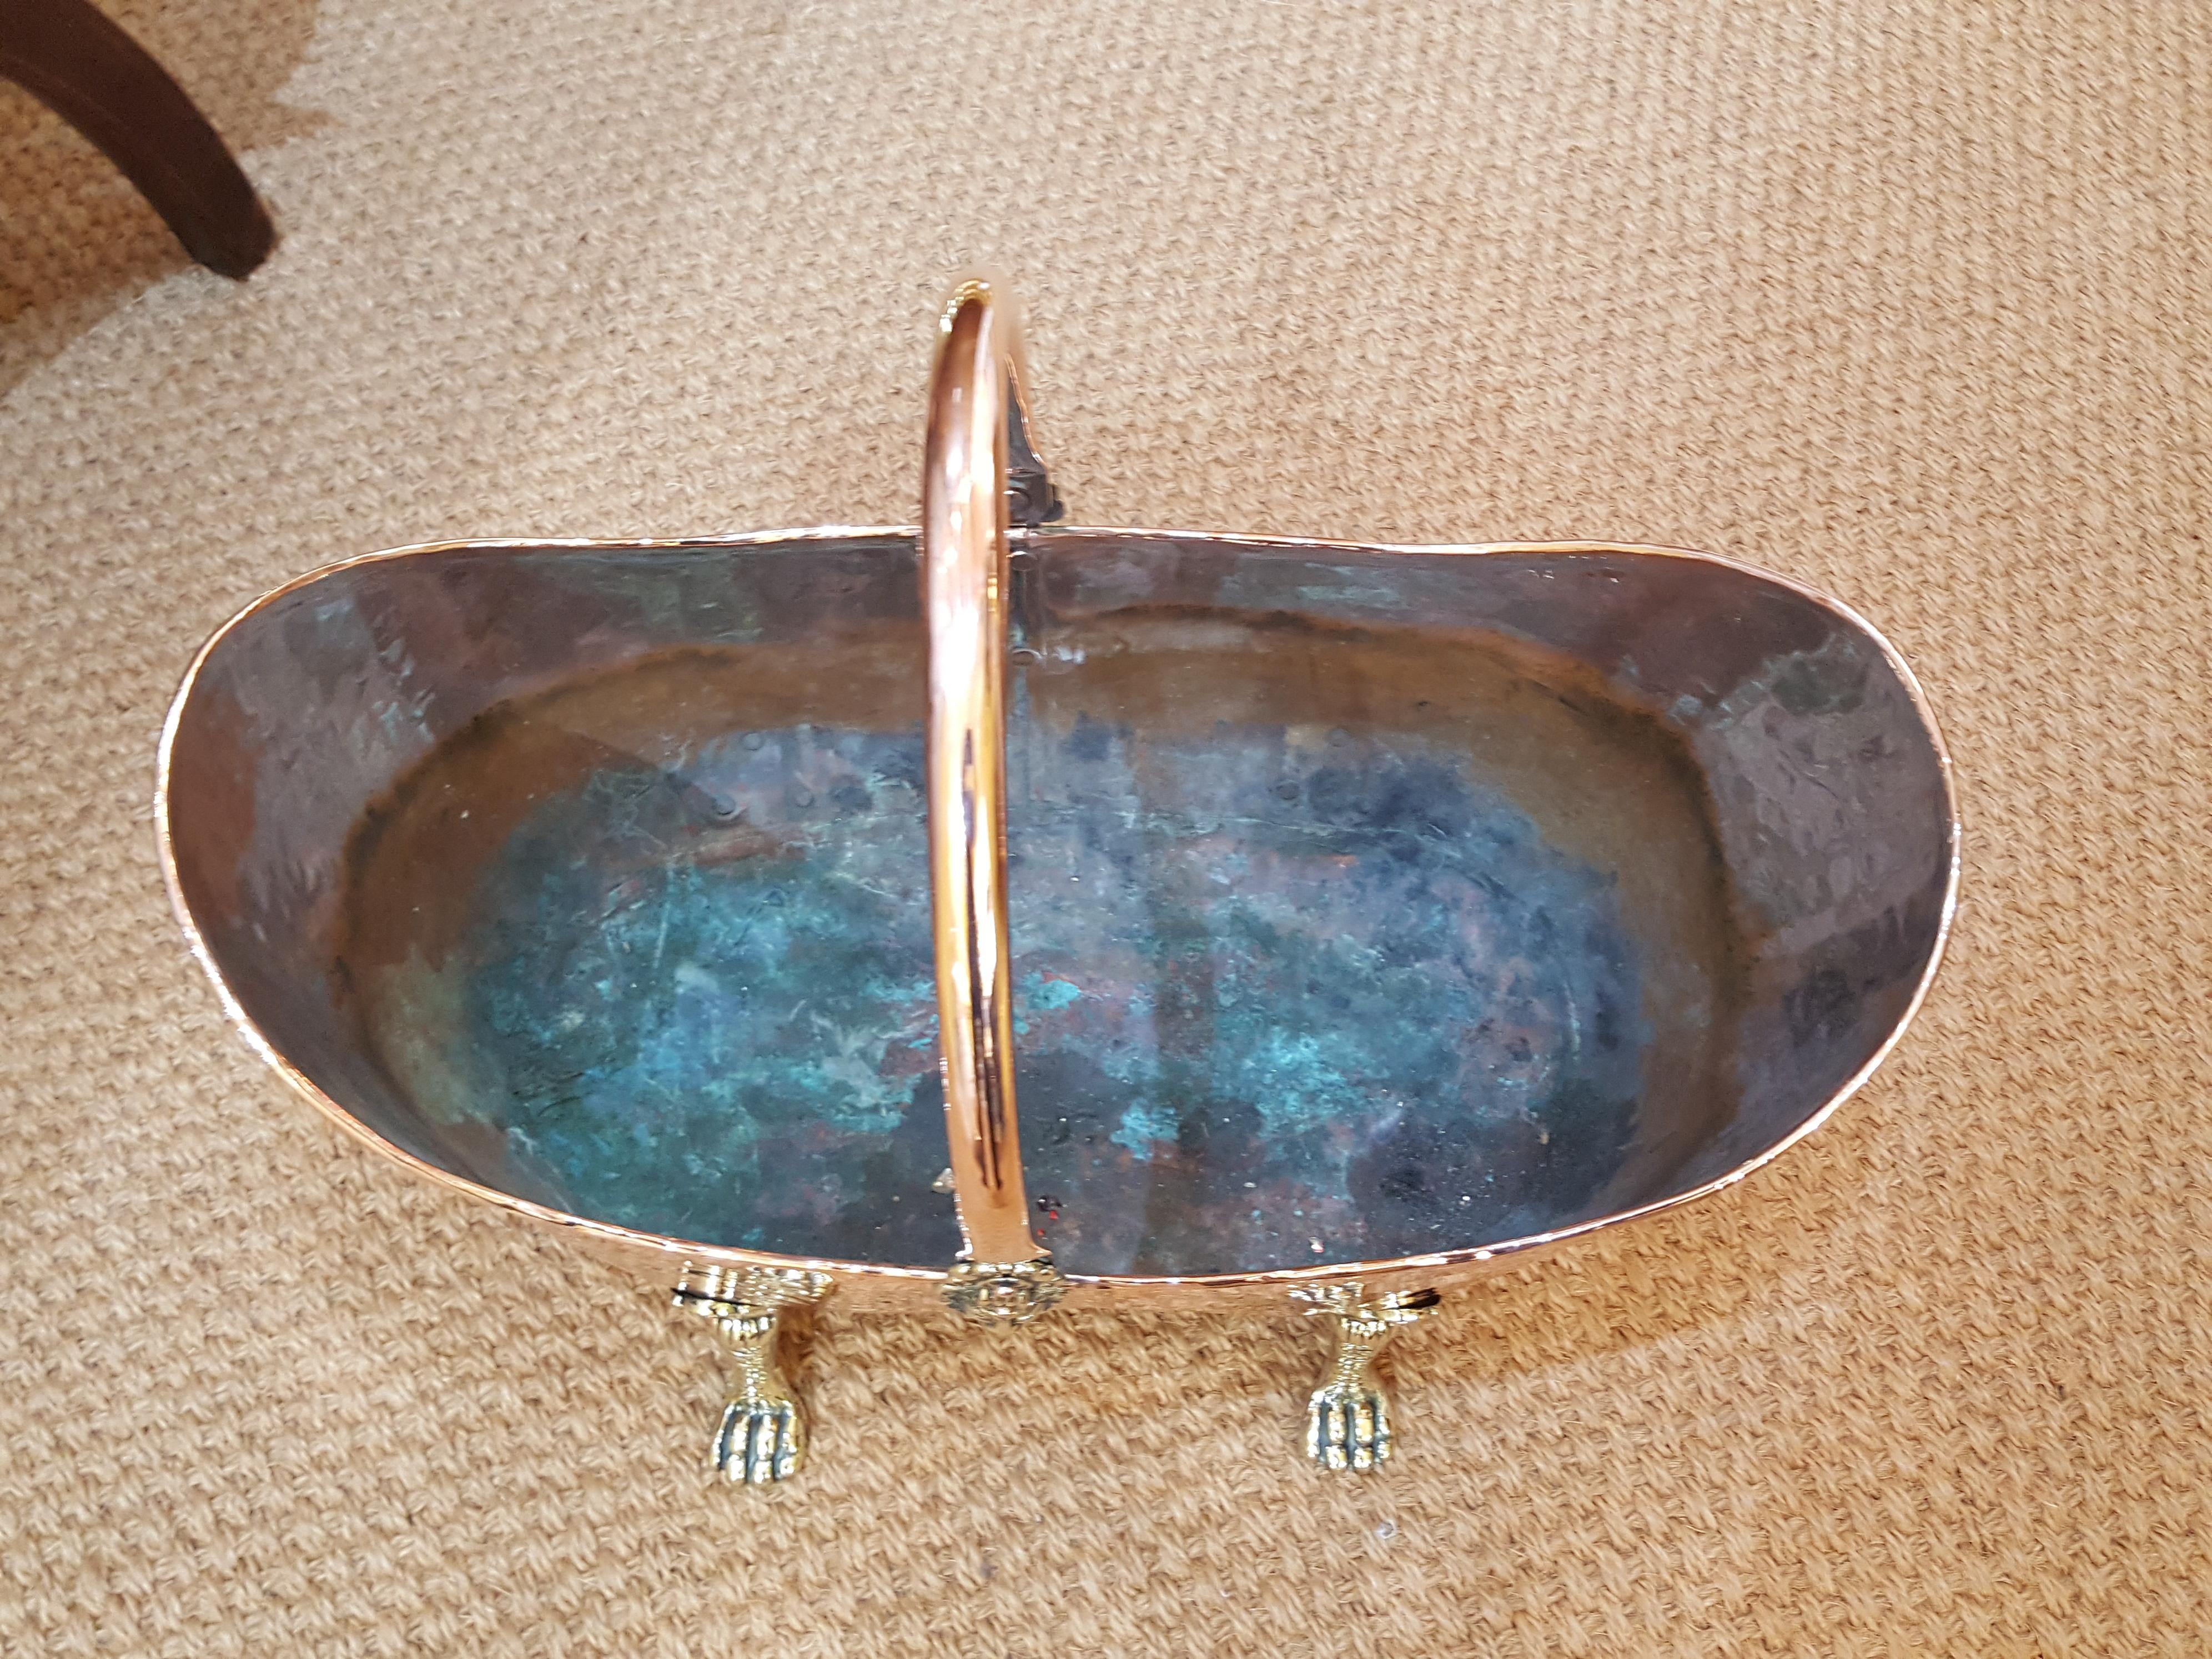 Victorian decorative hammered copper and brass kindling basket with lion mask handle and paw feet
Measures: 18